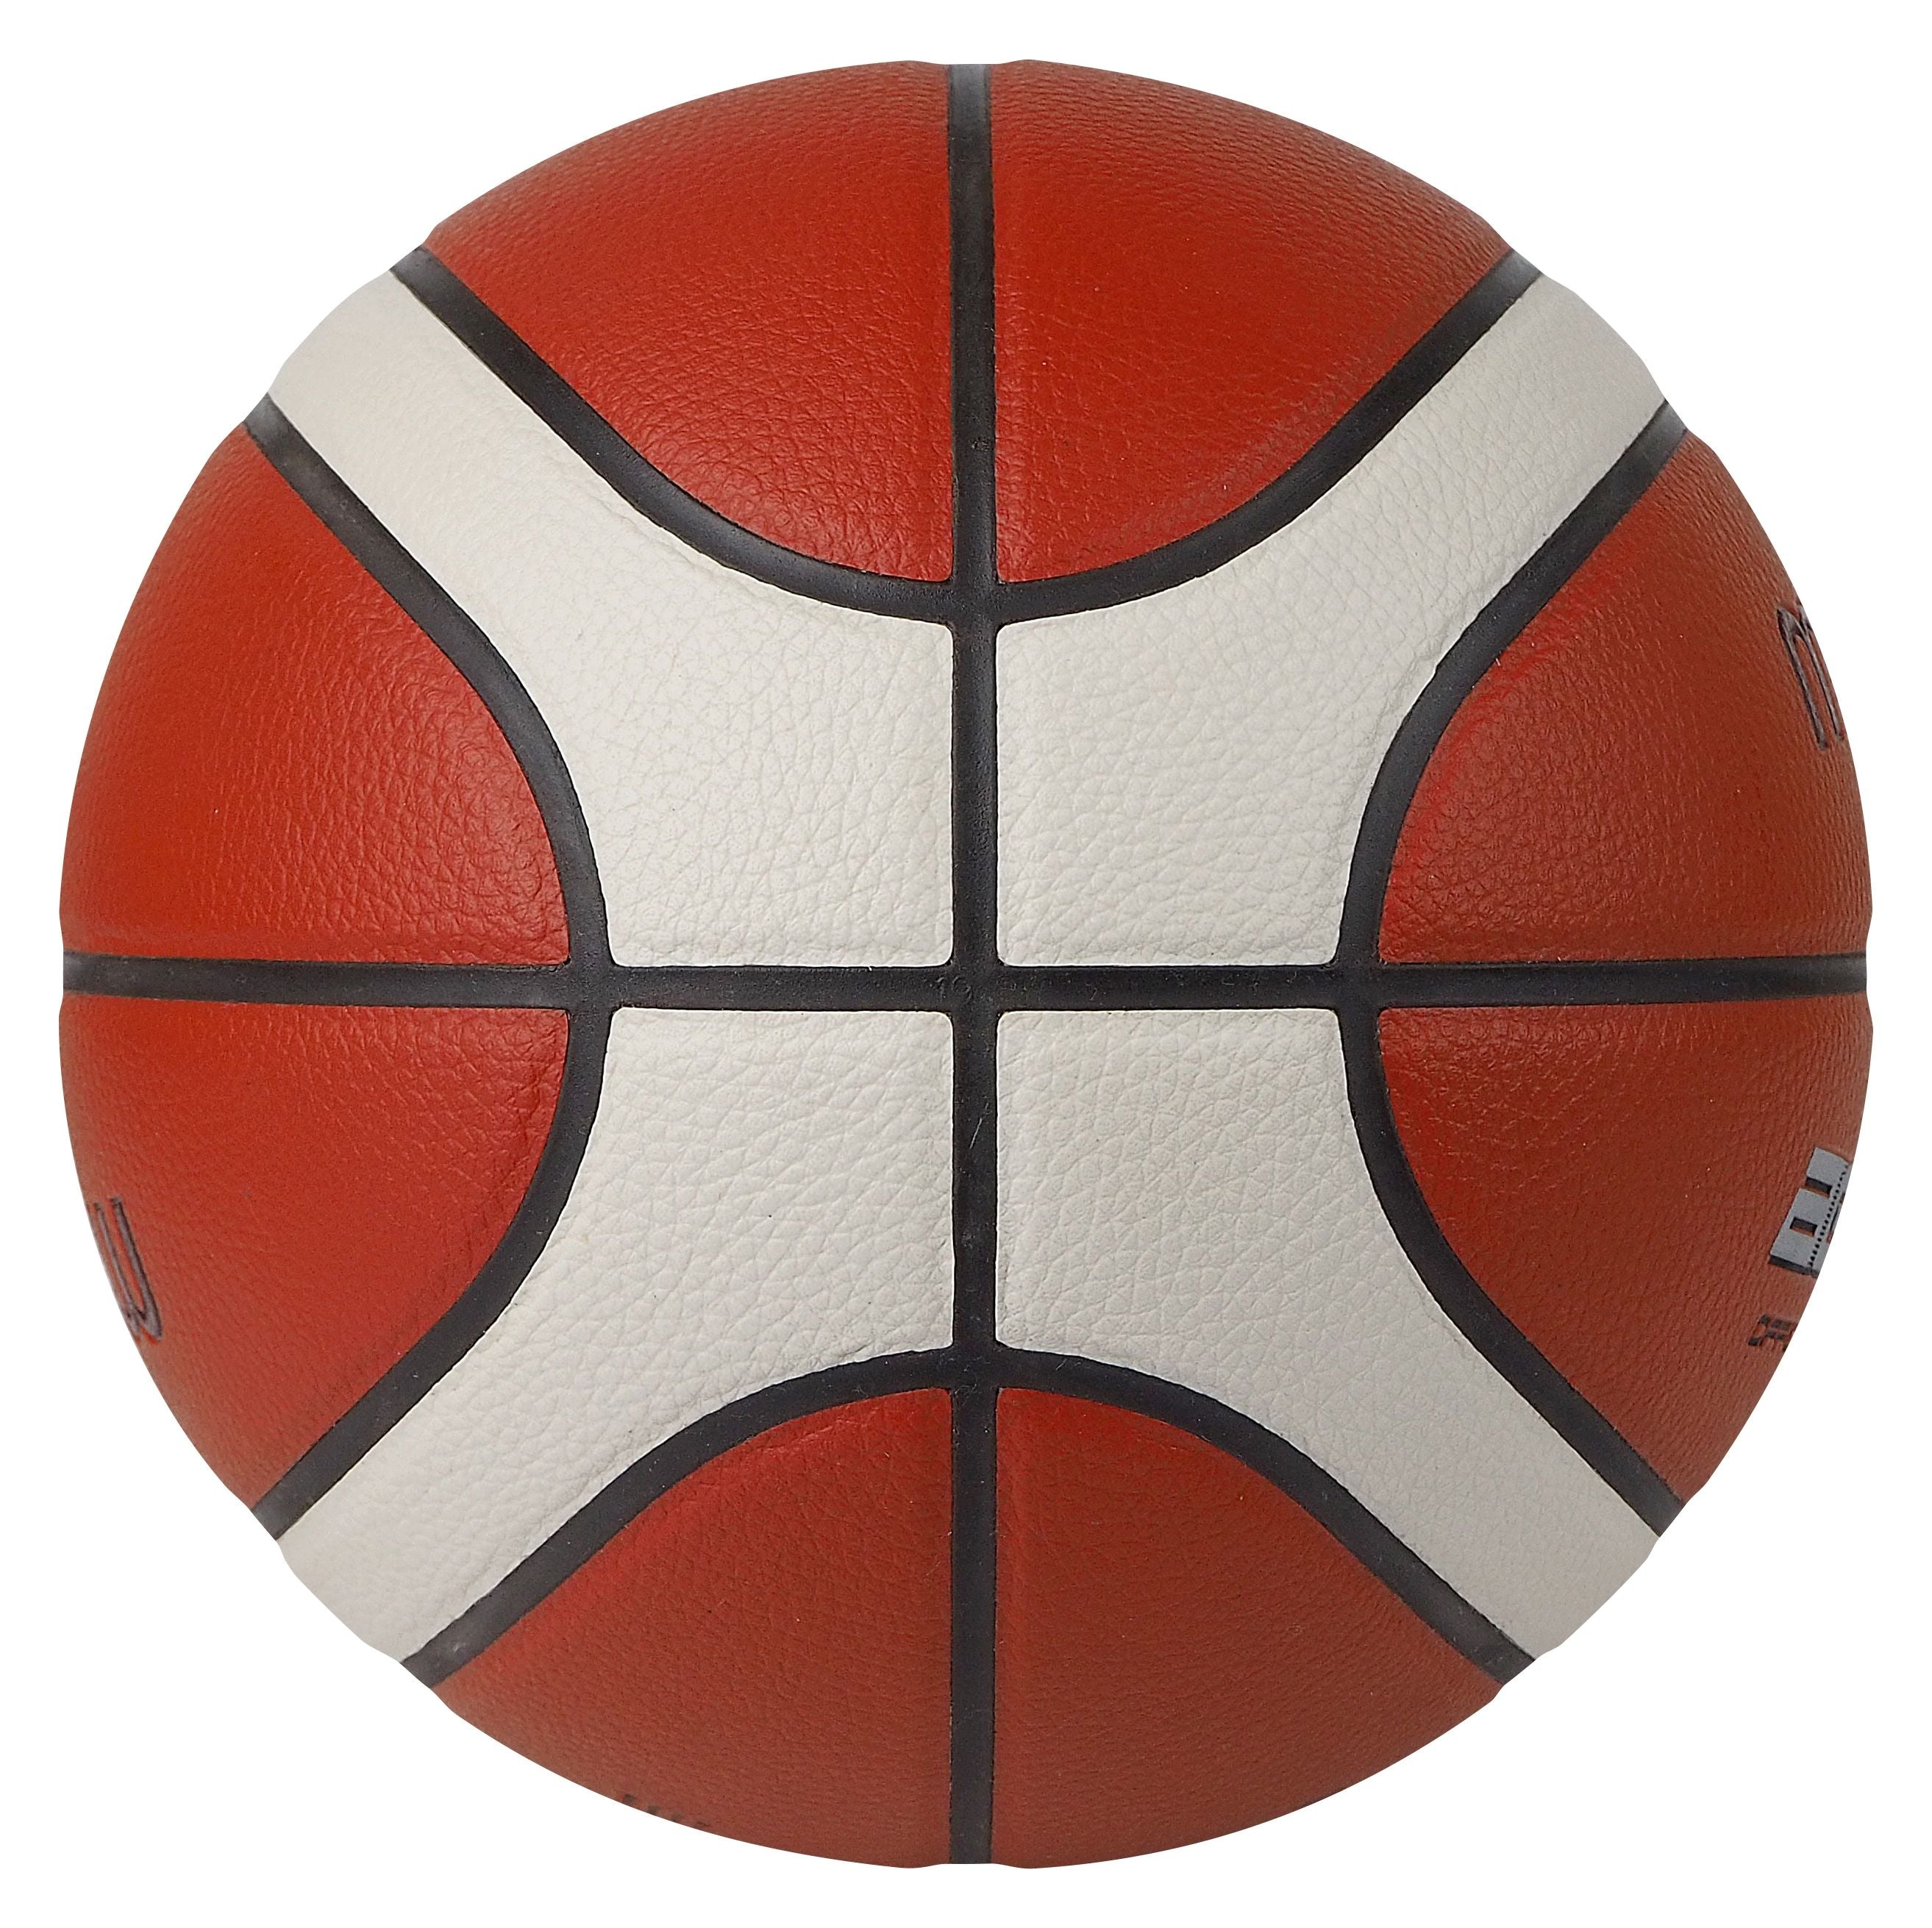 BG3000 Basketball 12 Panal Synthetic Leather (Indoor & Outdoor)